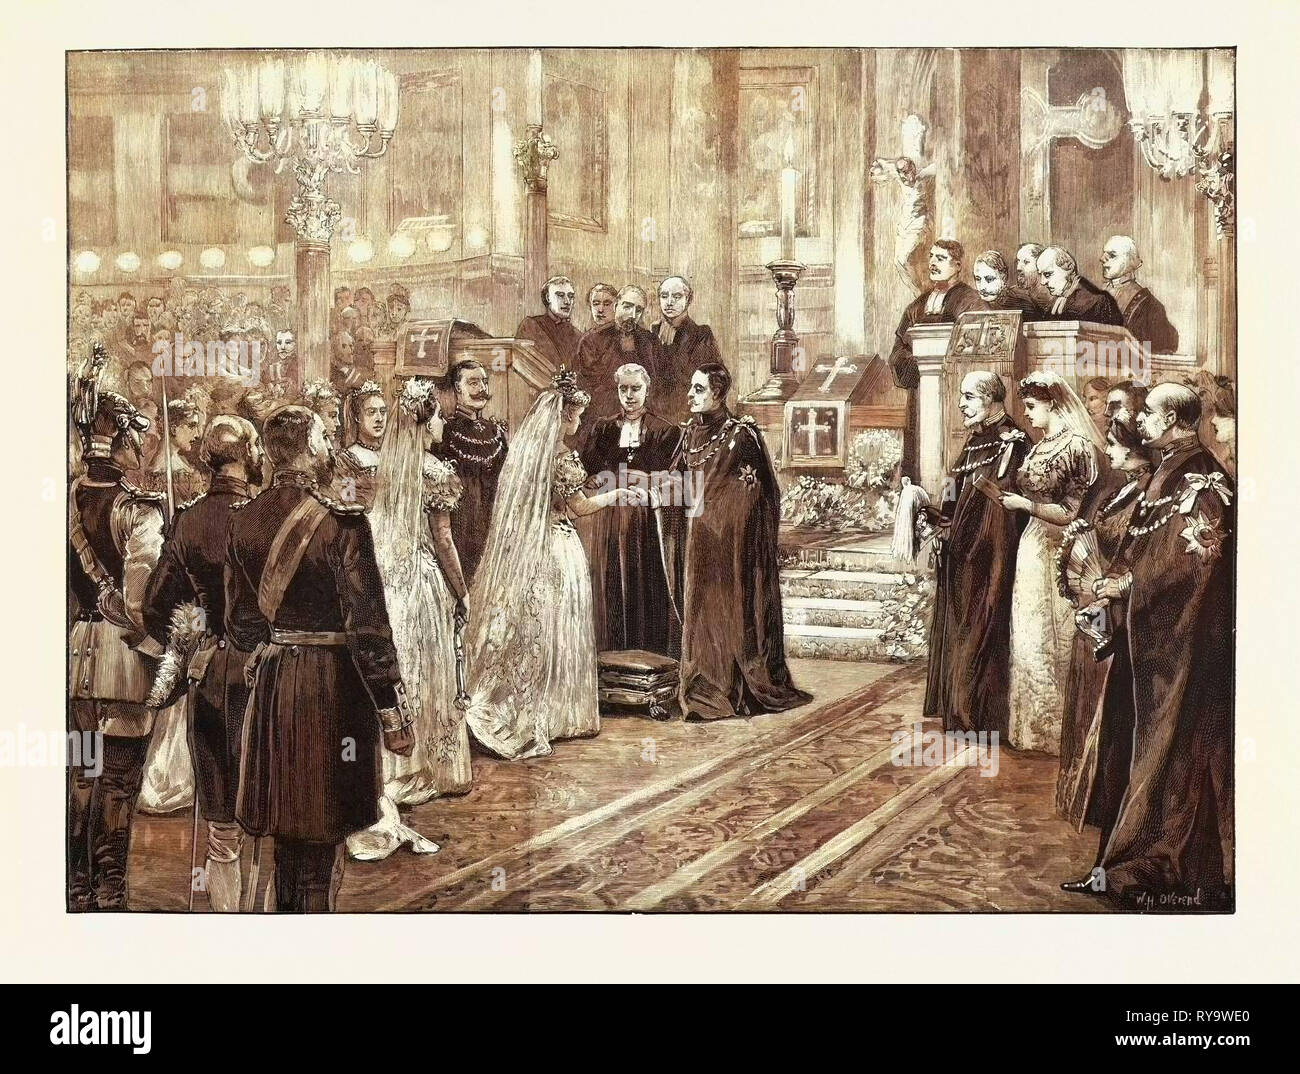 The Royal Marriage at Berlin, Germany: Wedding Ceremony in the Chapel of the Royal Palace, Prince Frederick Charles of Hesse and Princess Margaret of Prussia, 1893, 1893 Engraving Stock Photo